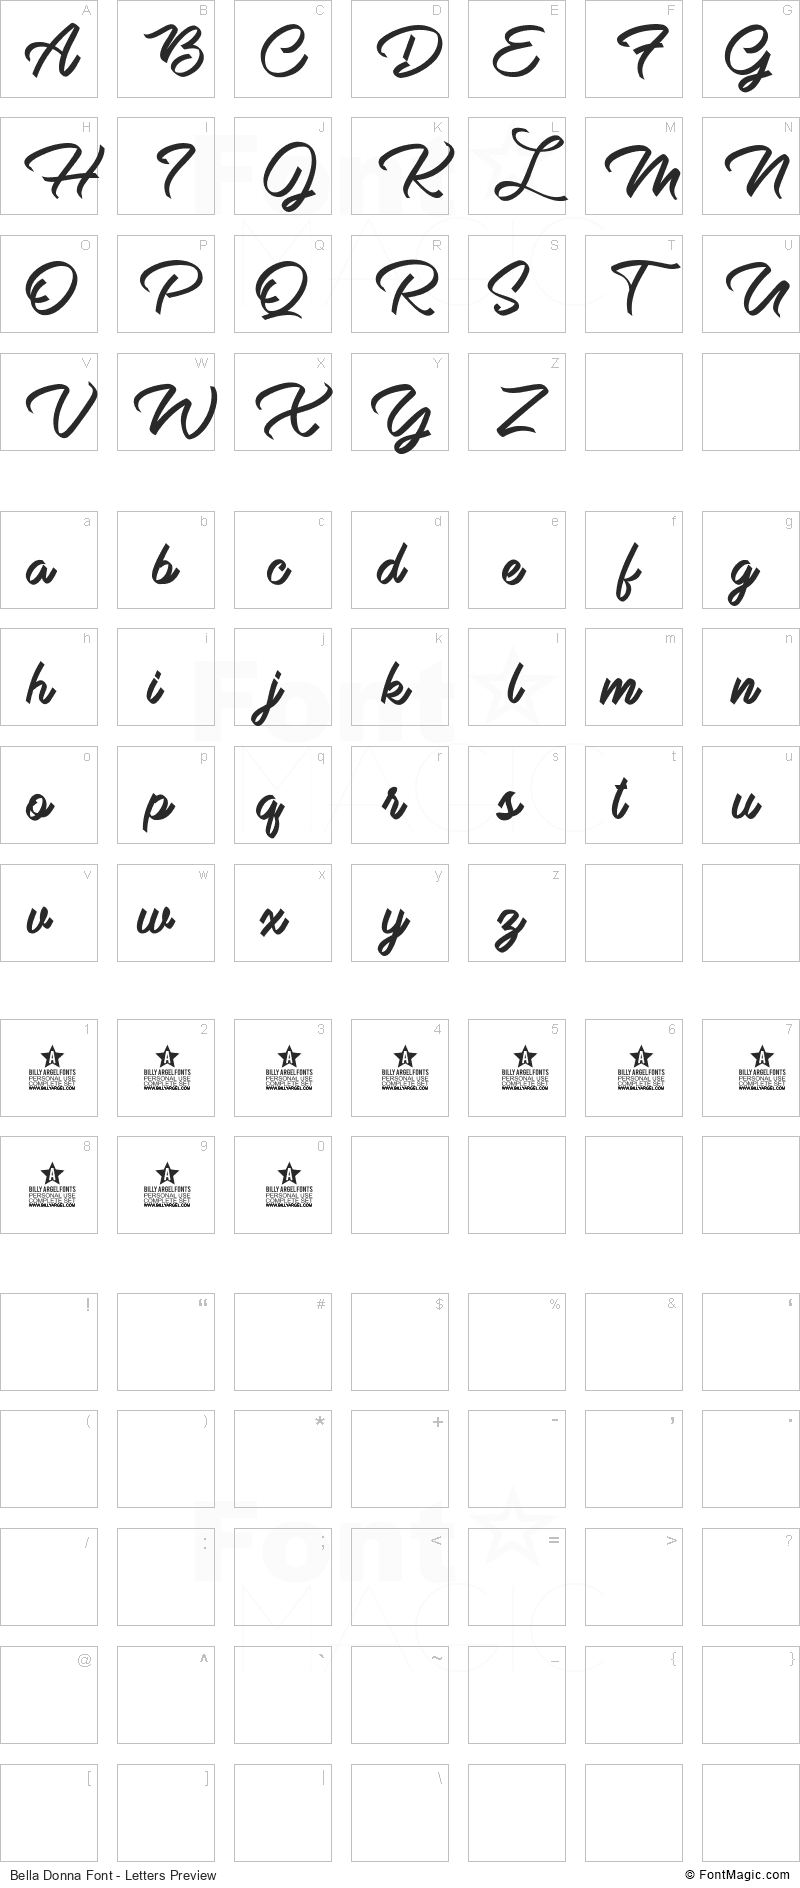 Bella Donna Font - All Latters Preview Chart